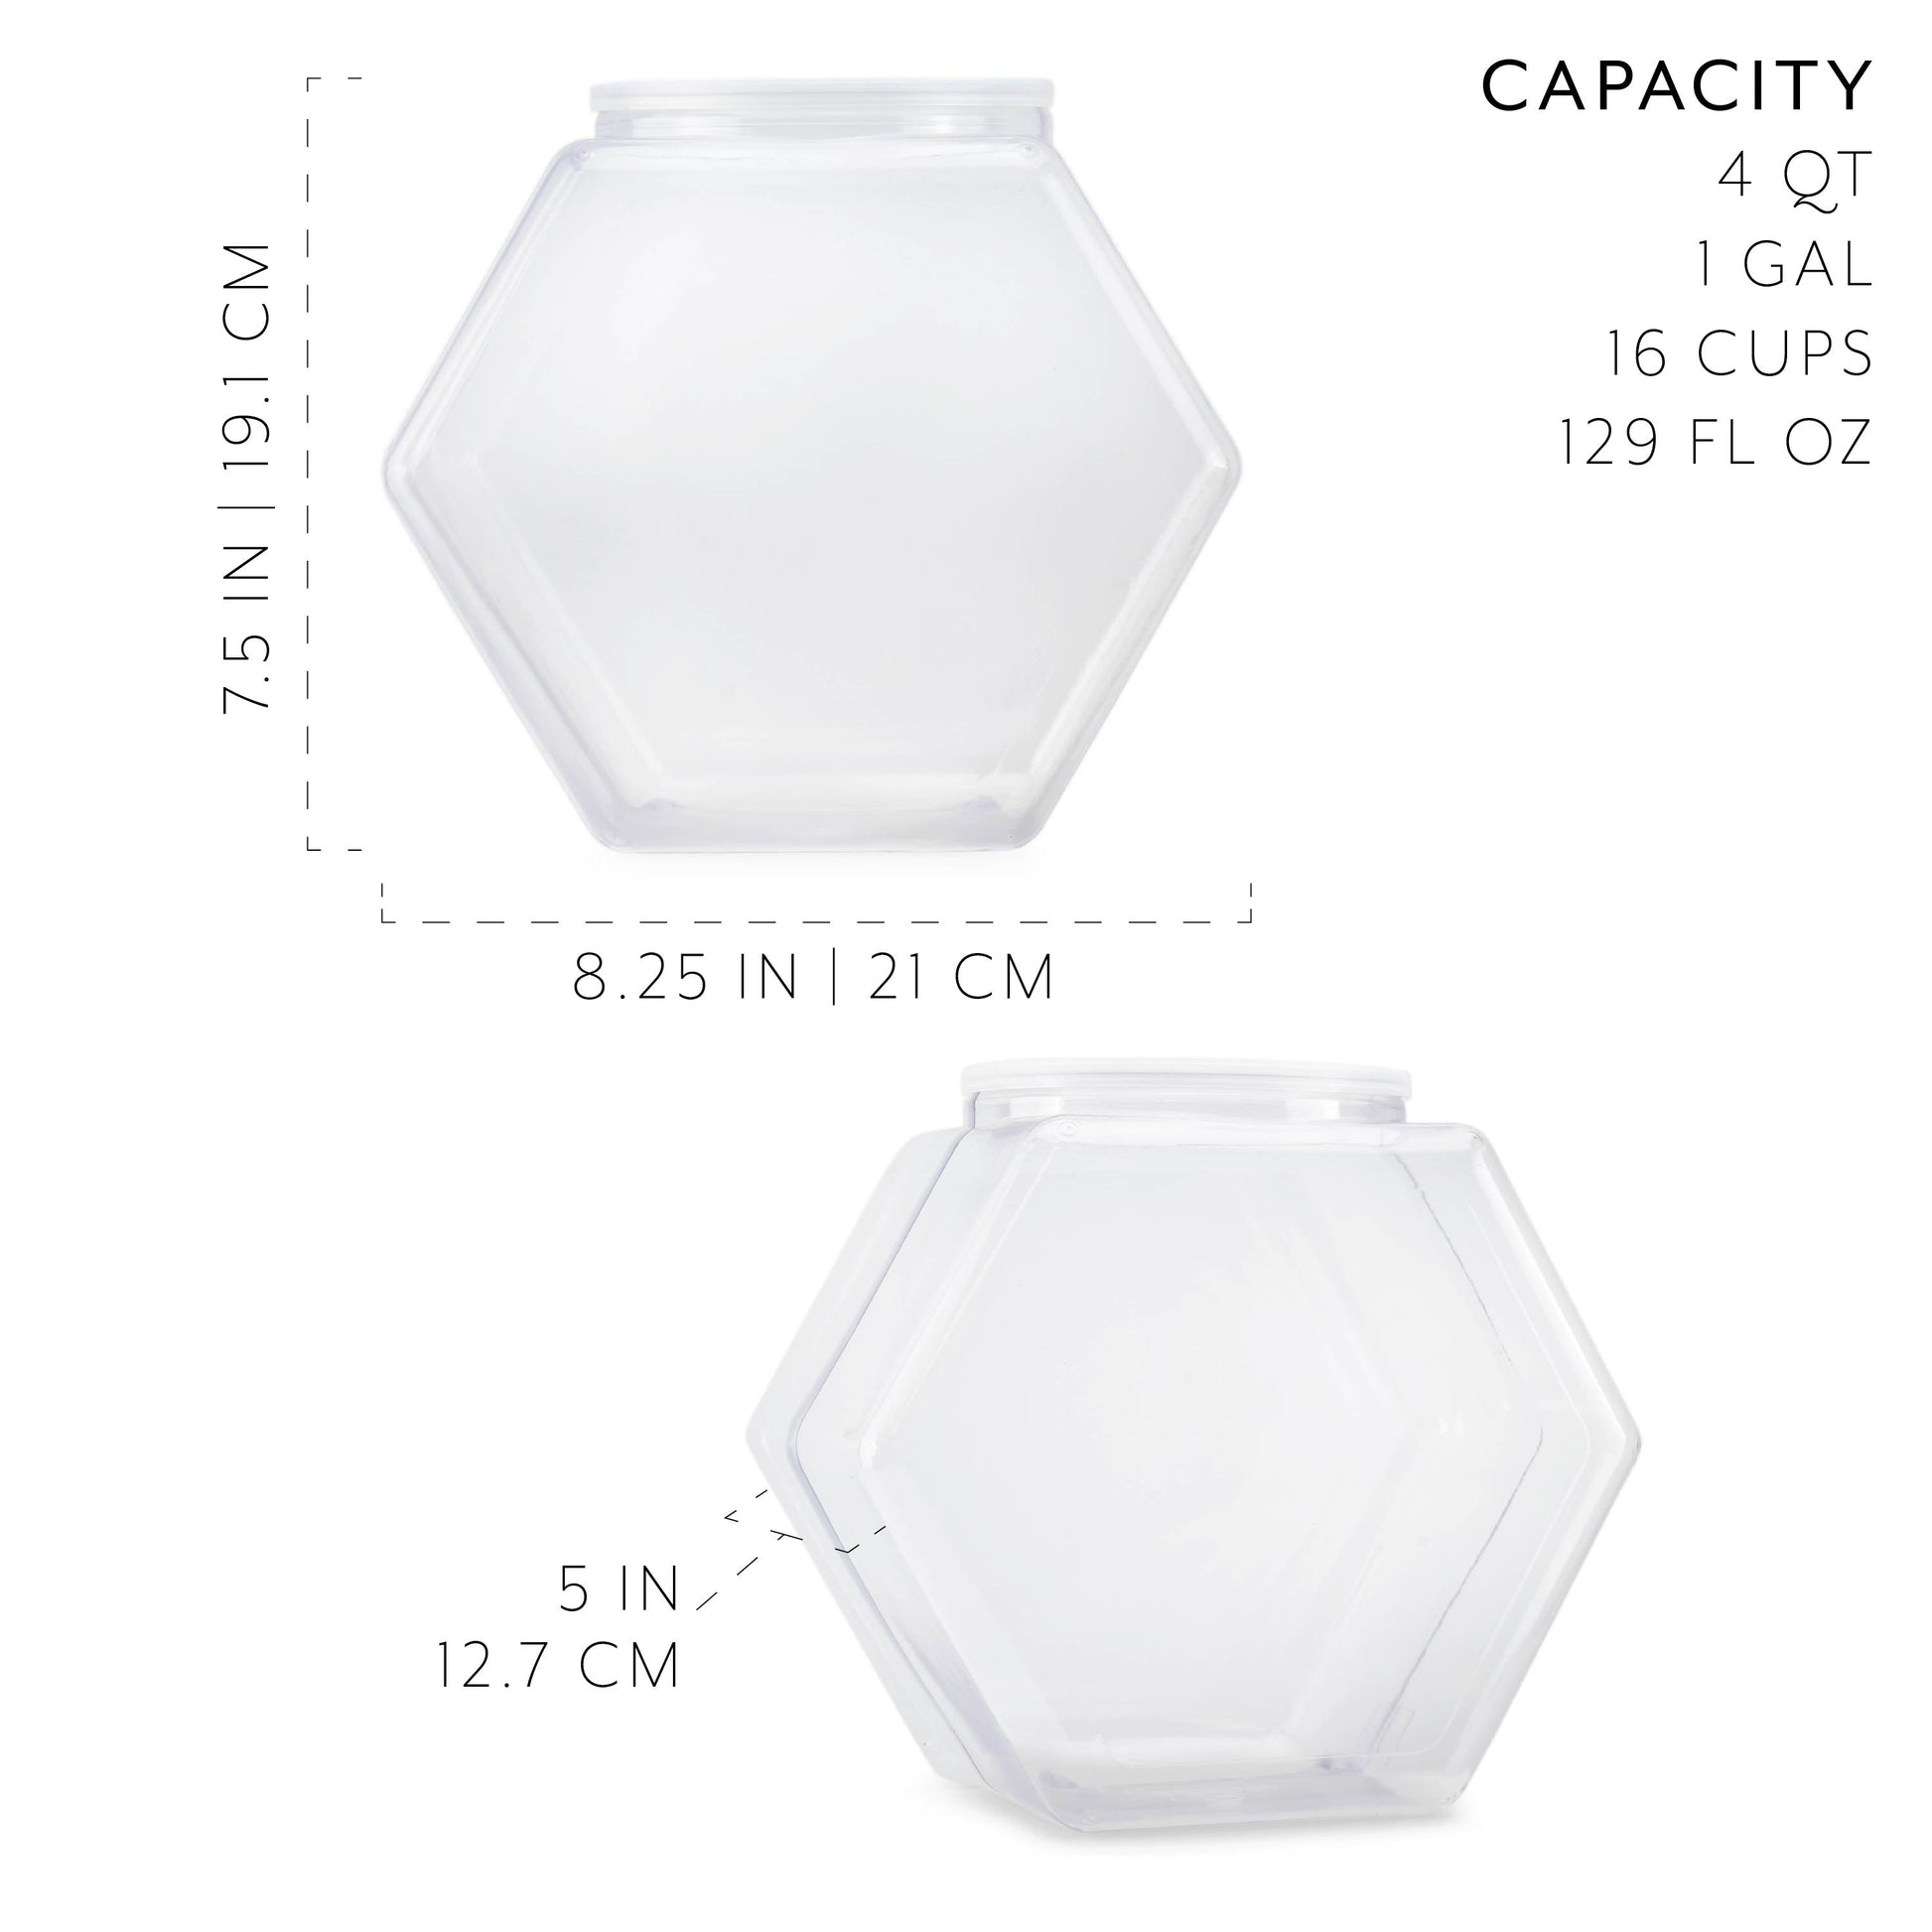 Gallon Plastic Container Candy Jars (2-Pack) - CBKit014